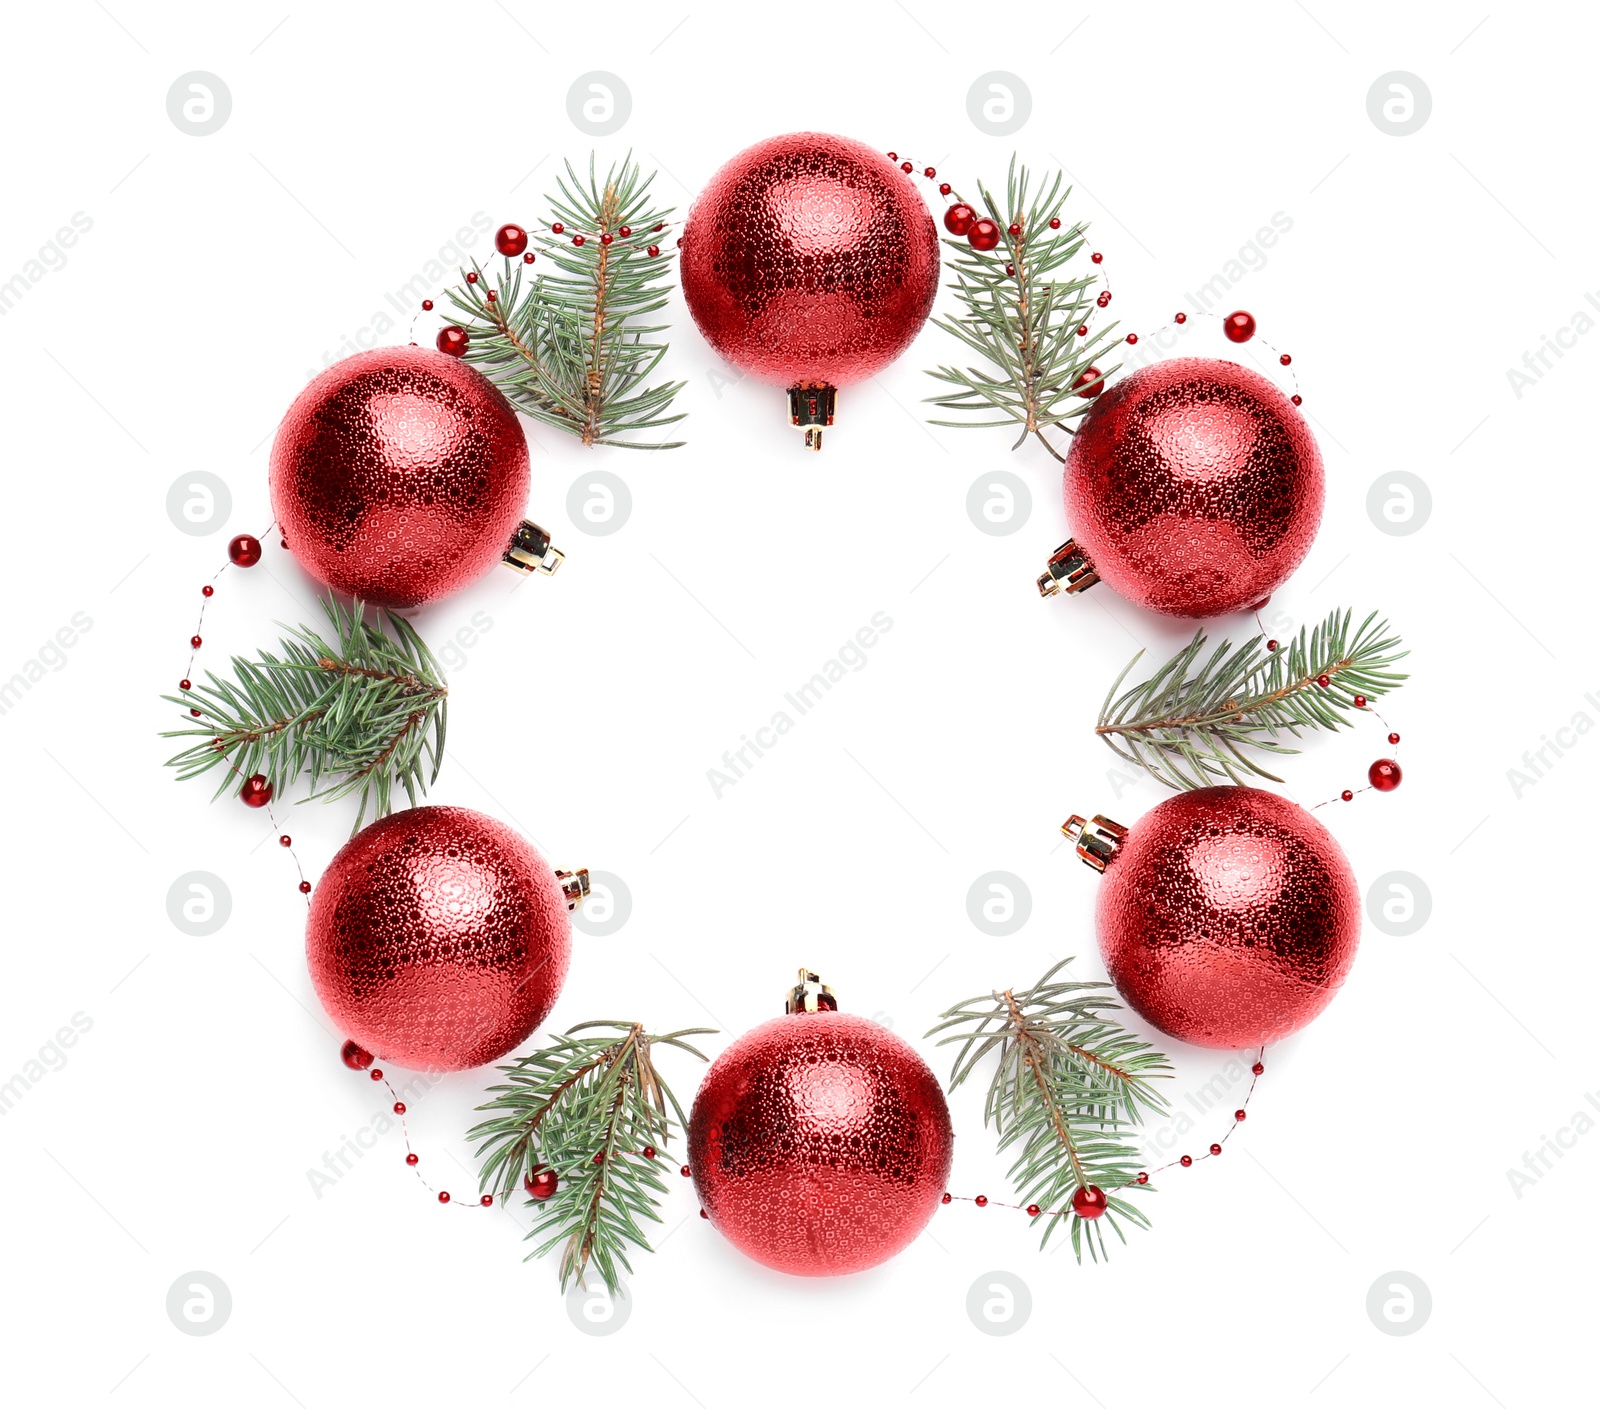 Photo of Beautiful Christmas wreath made of shiny red baubles, garland and fir branches on white background, top view